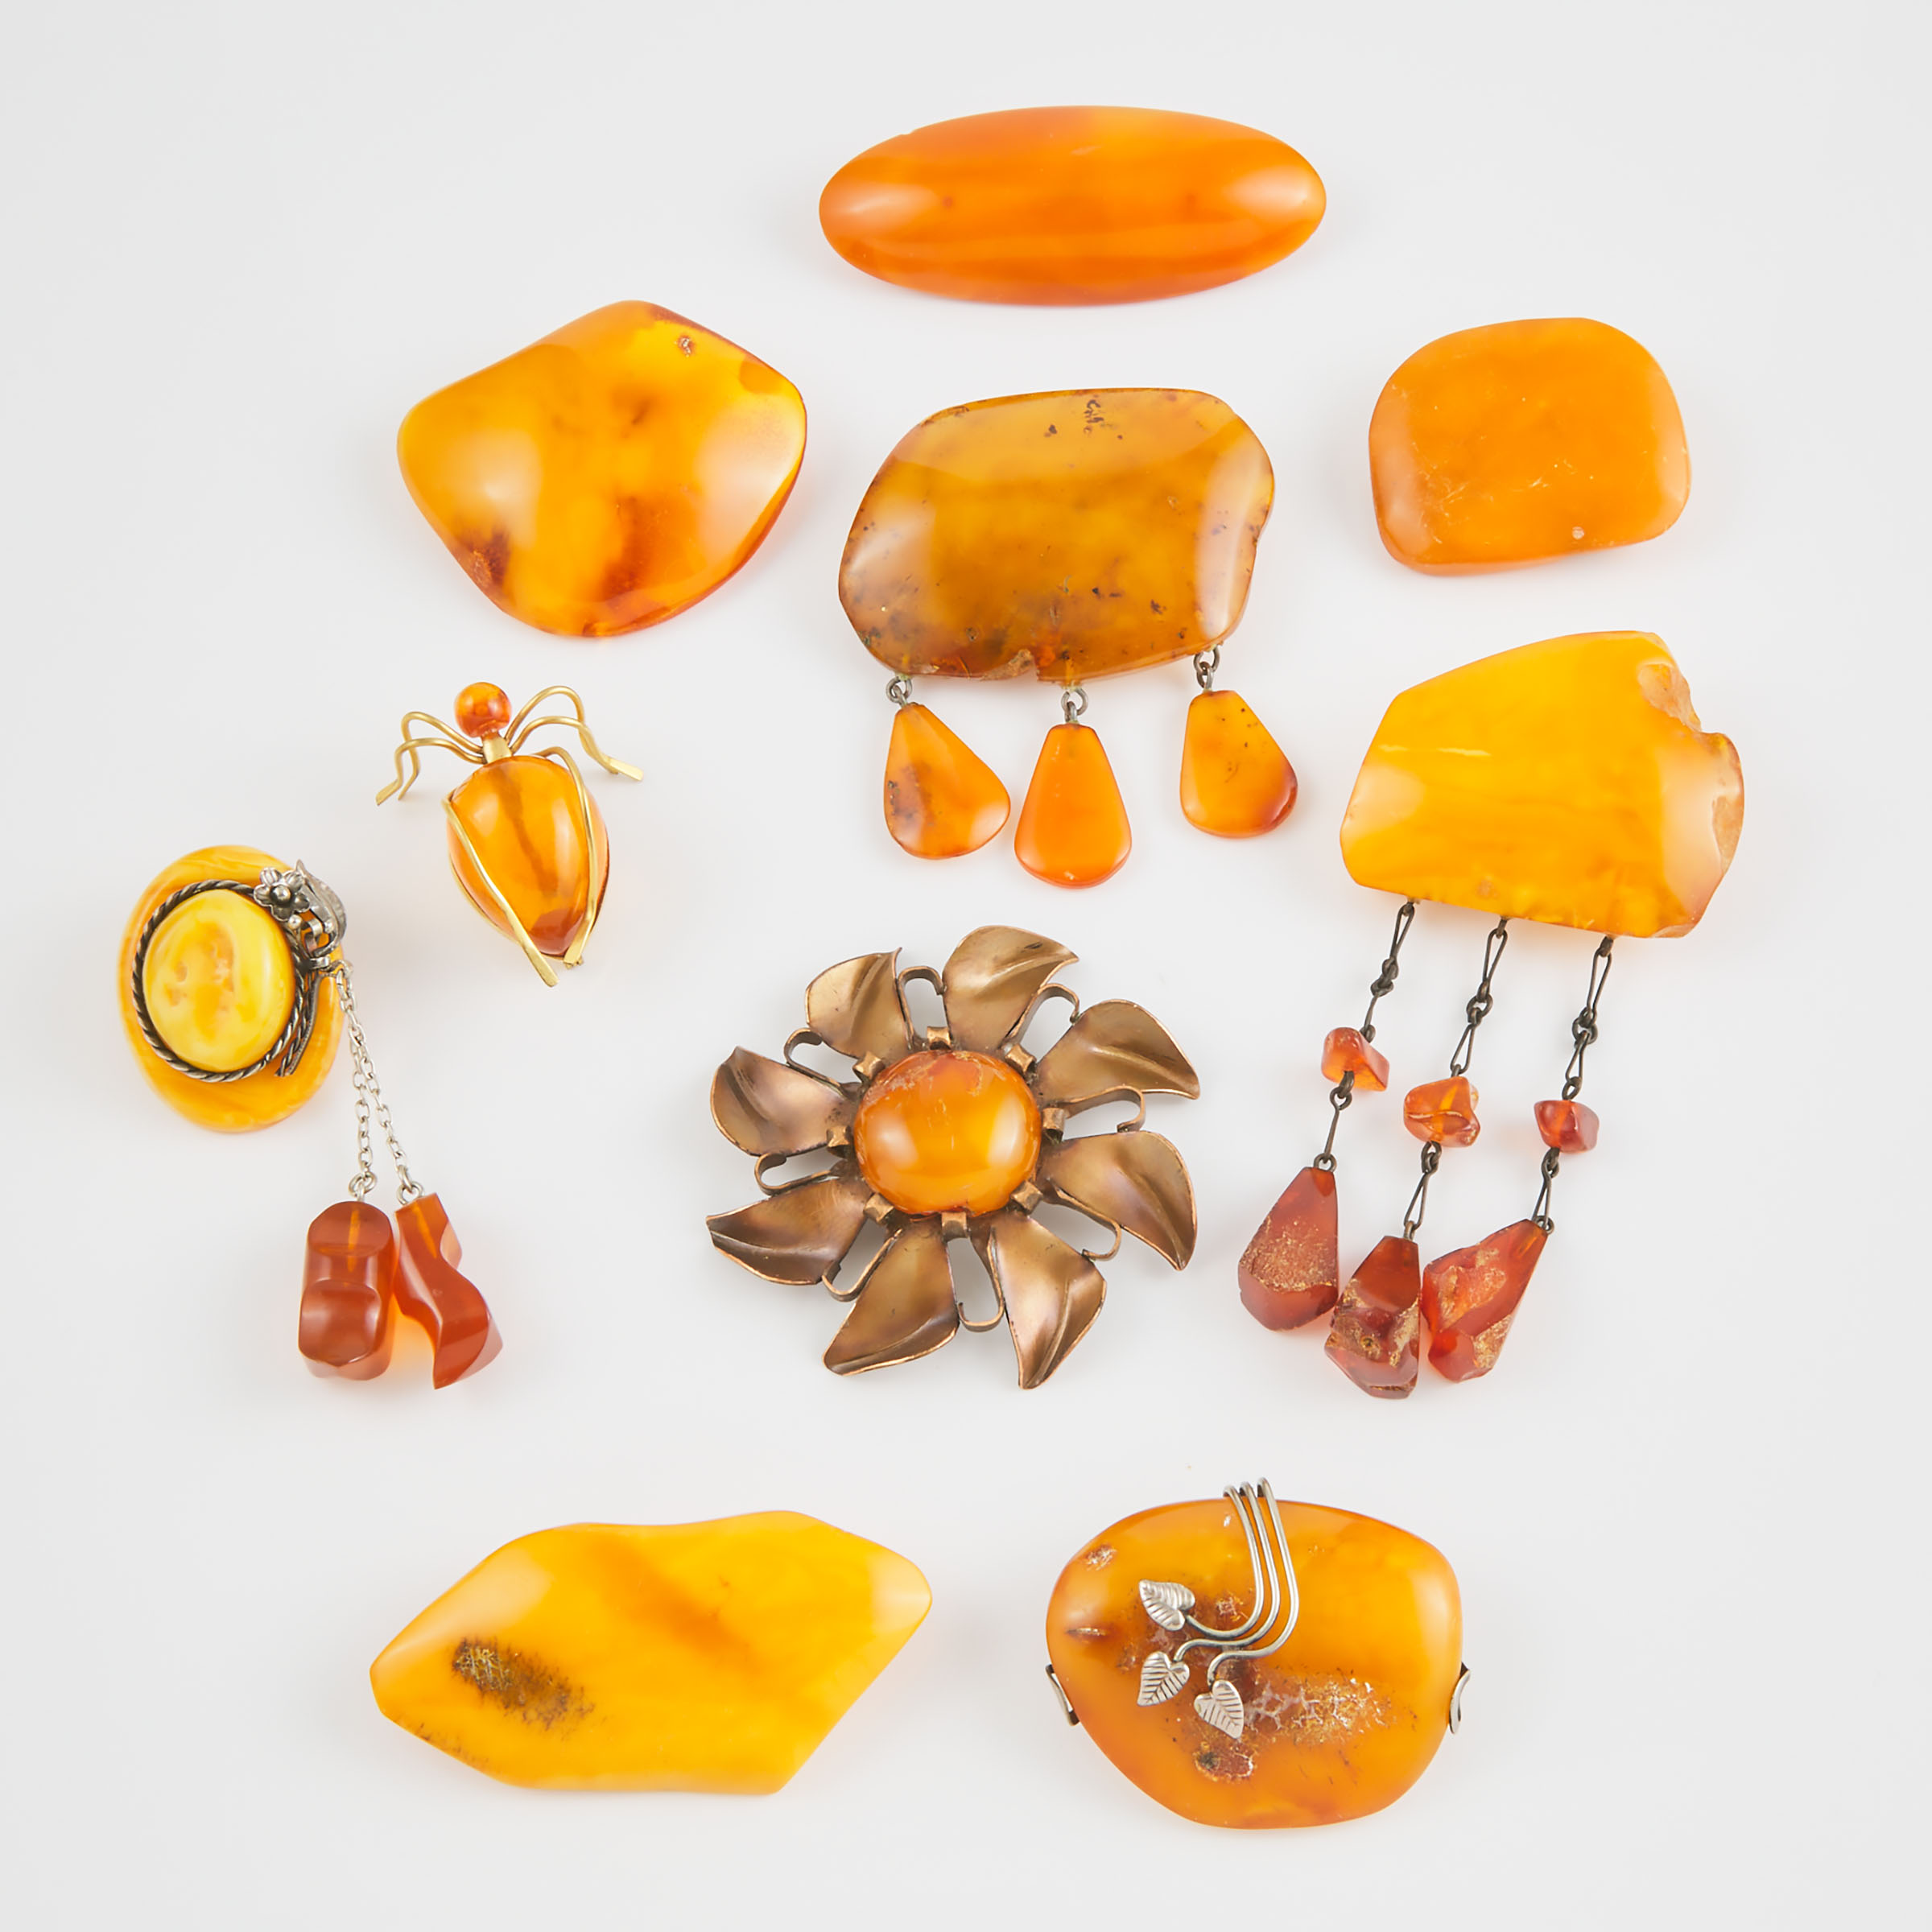 10 Various Amber And Metal Brooches